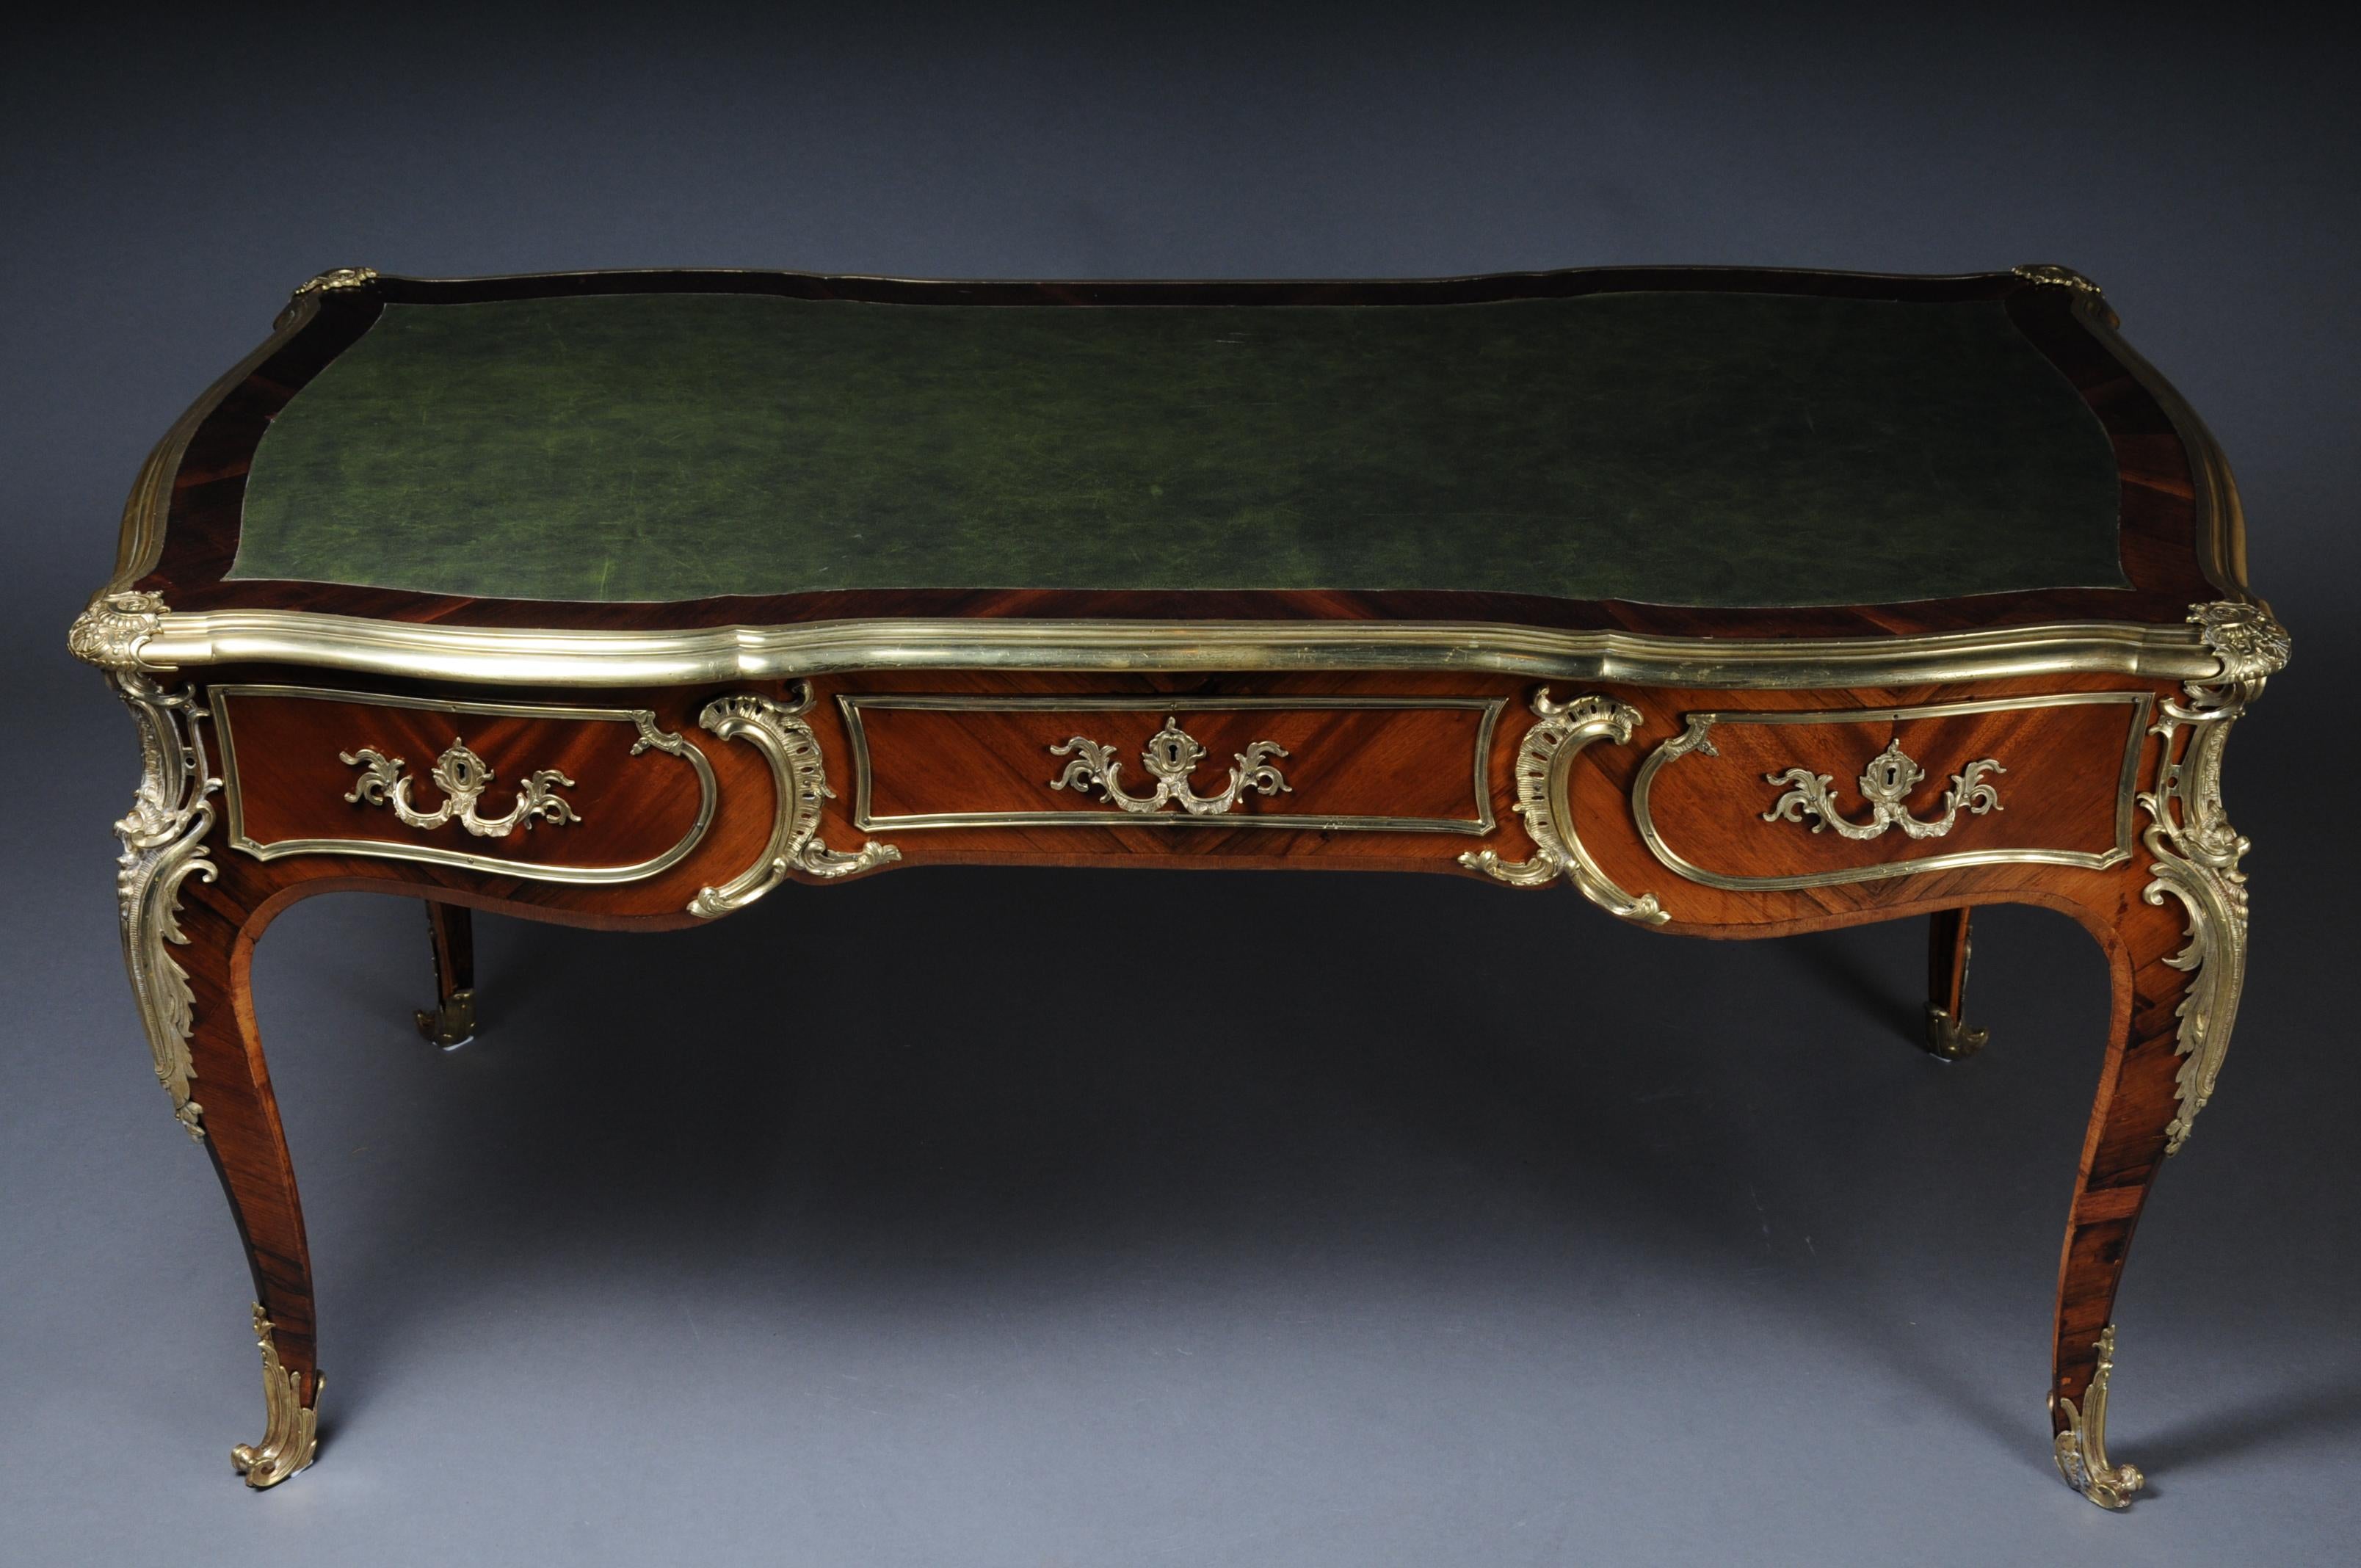 Famous French bureau plat or desk Napoleon III, circa 1870

In Bois Satiné veneer, mirror veneer covering all sides with rocaille applications. Edged with extremely finely chiselled, extremely decorative, restrained bronze fittings. Tulip veneer